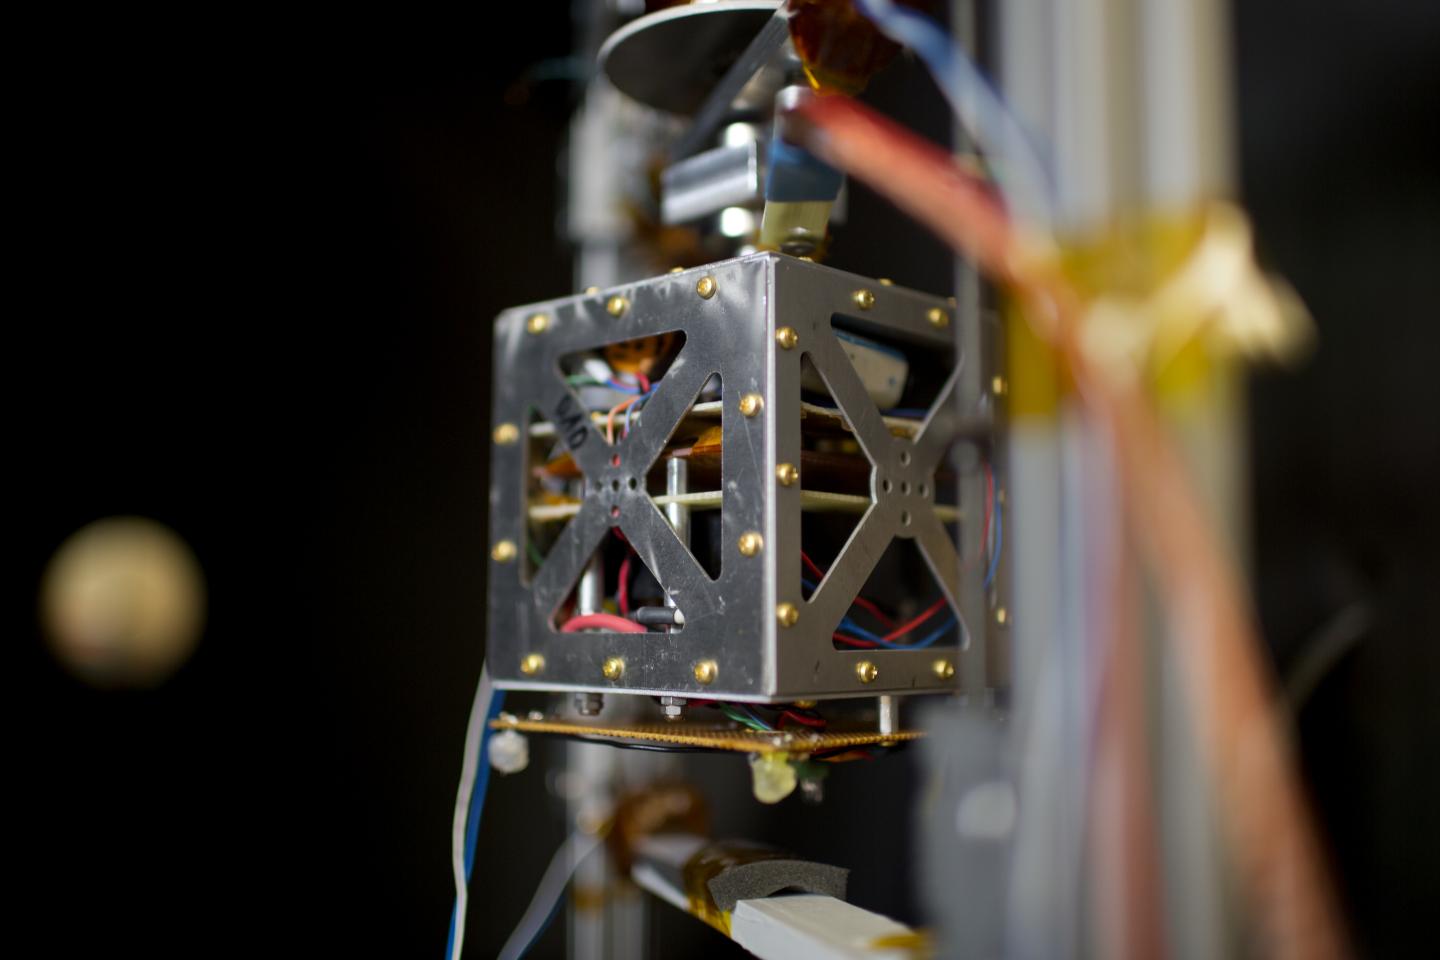 A small satellite levitates in a vacuum chamber used to test thruster design in the Space Propulsion Lab at MIT.